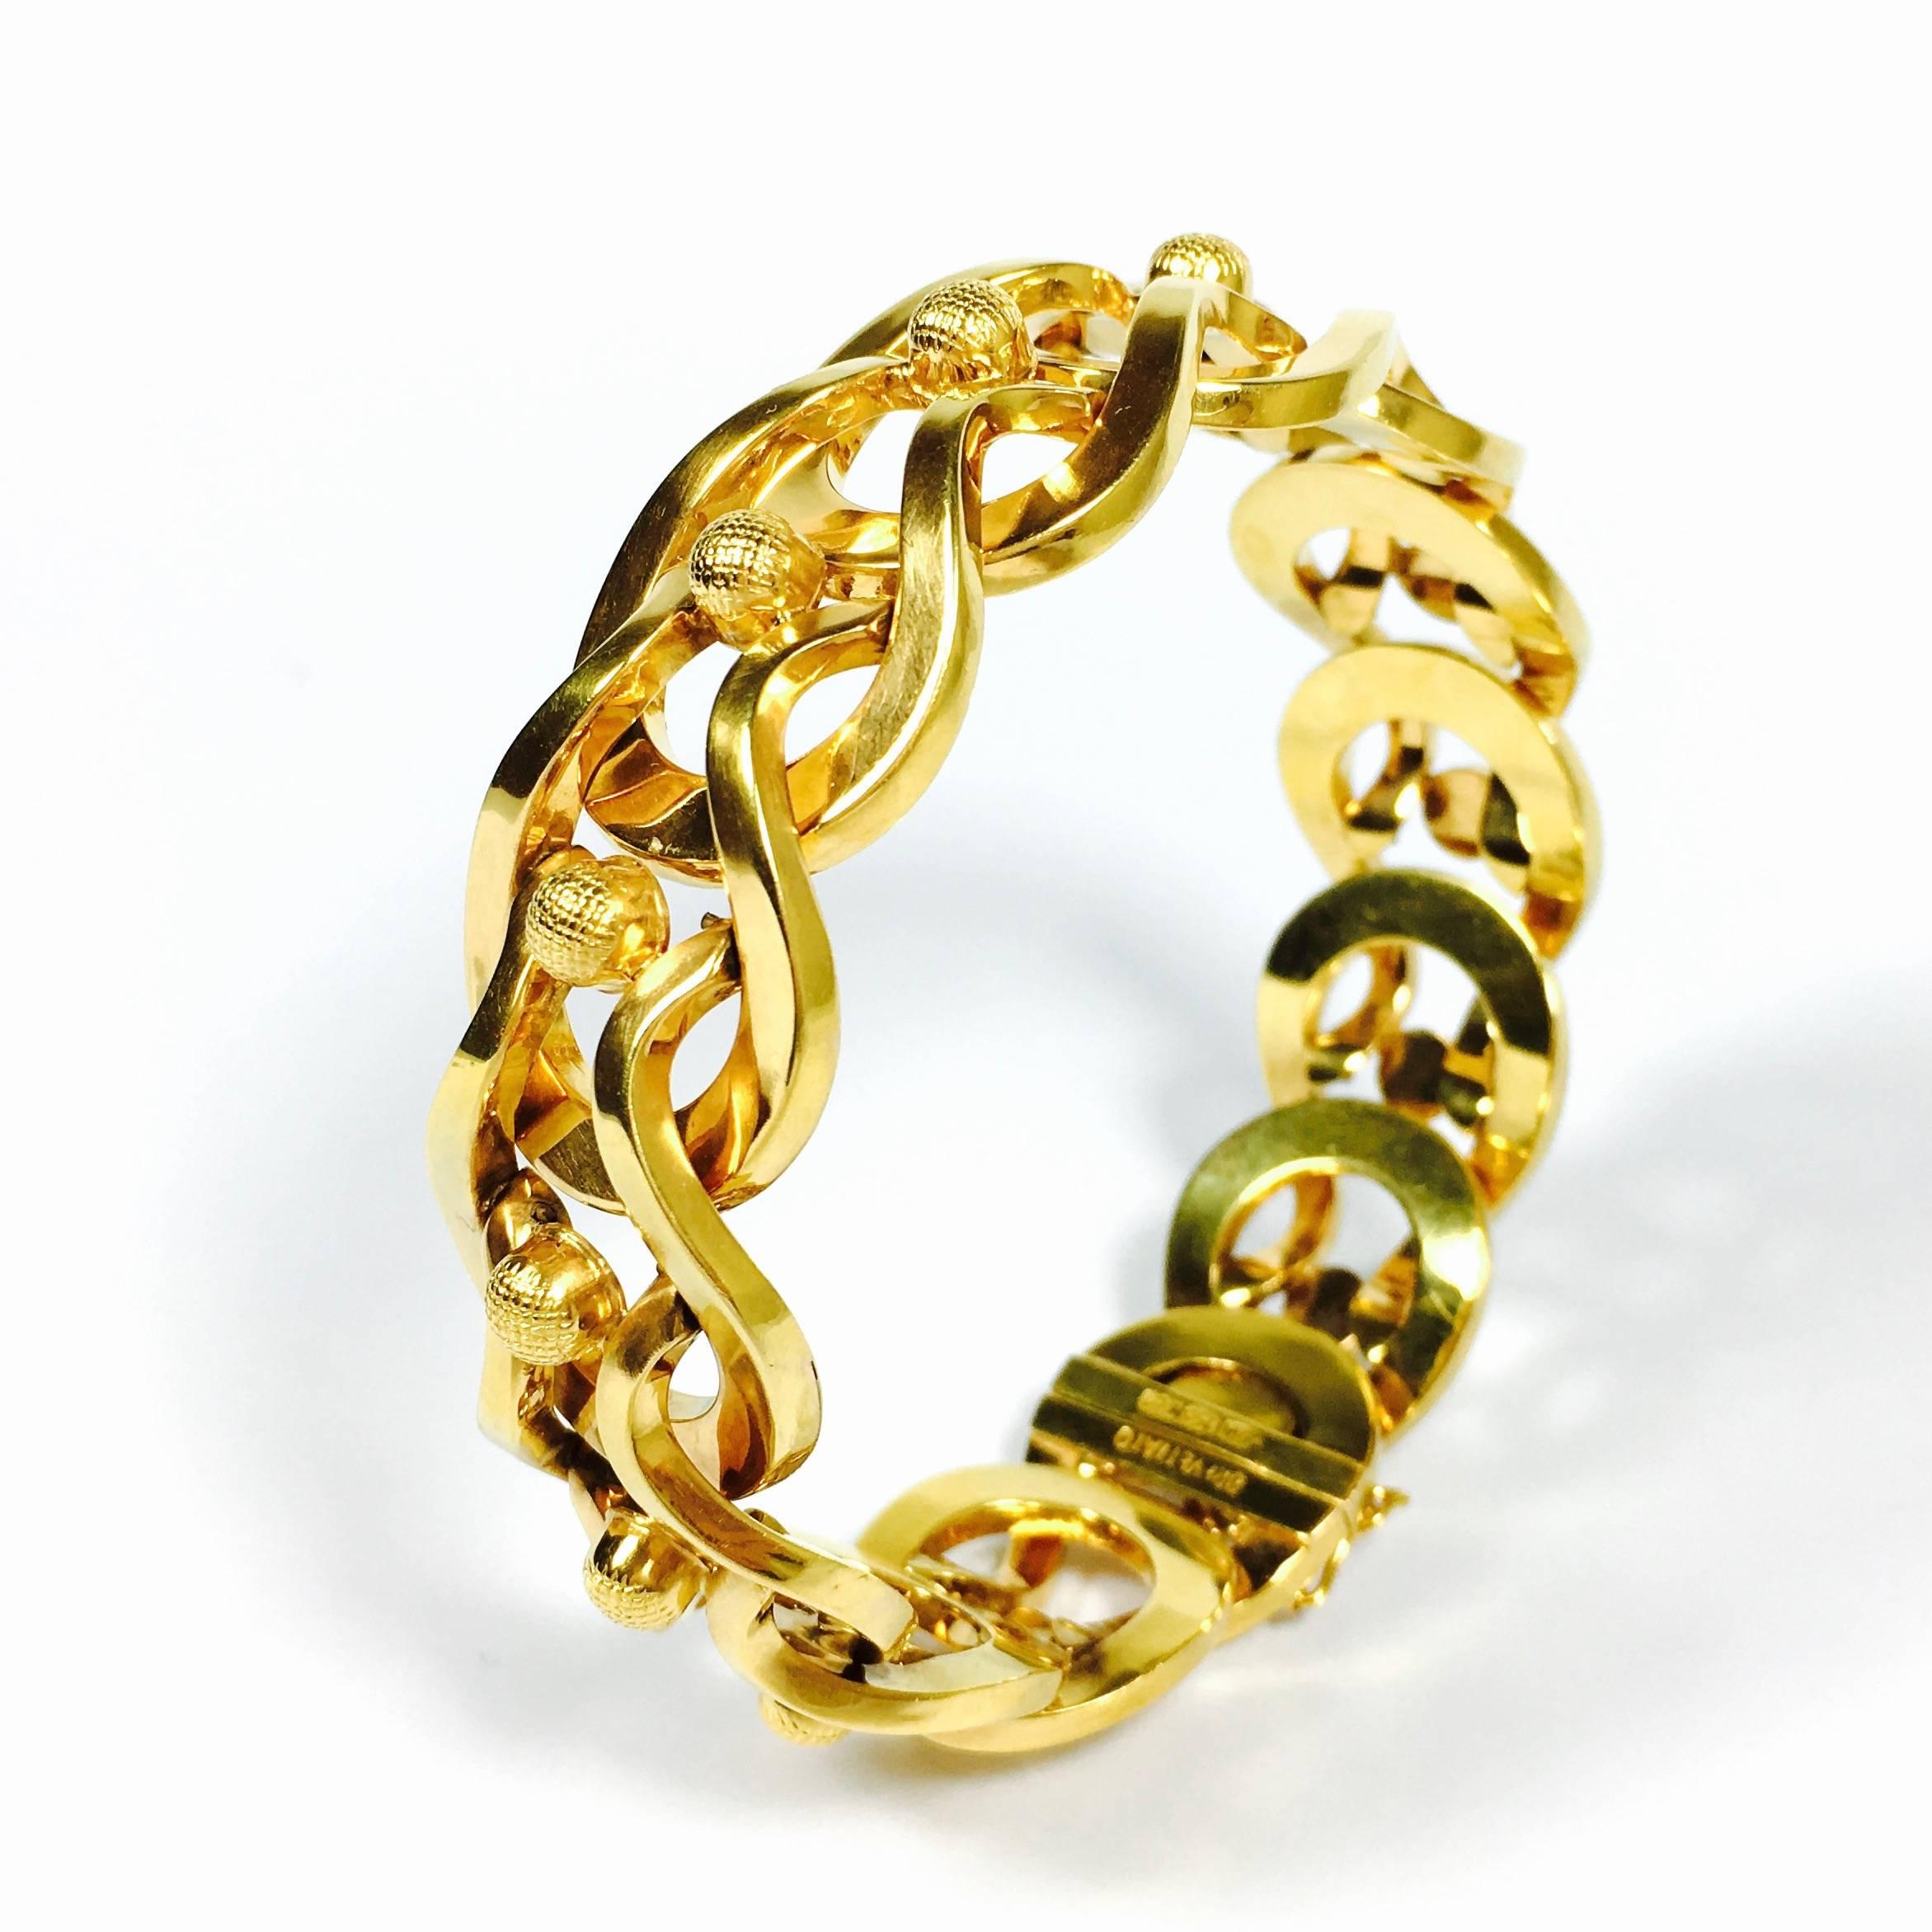 Very unique and gorgeous 18K yellow gold bracelet from the italian jewelry company Brevettato. Flexible when opened, but acting like a bangle closed on the wrist. Excellent workmanship. 20 mm wide. 
Weight: 35.4 grams
Fits up to a 7 inch wrist. 